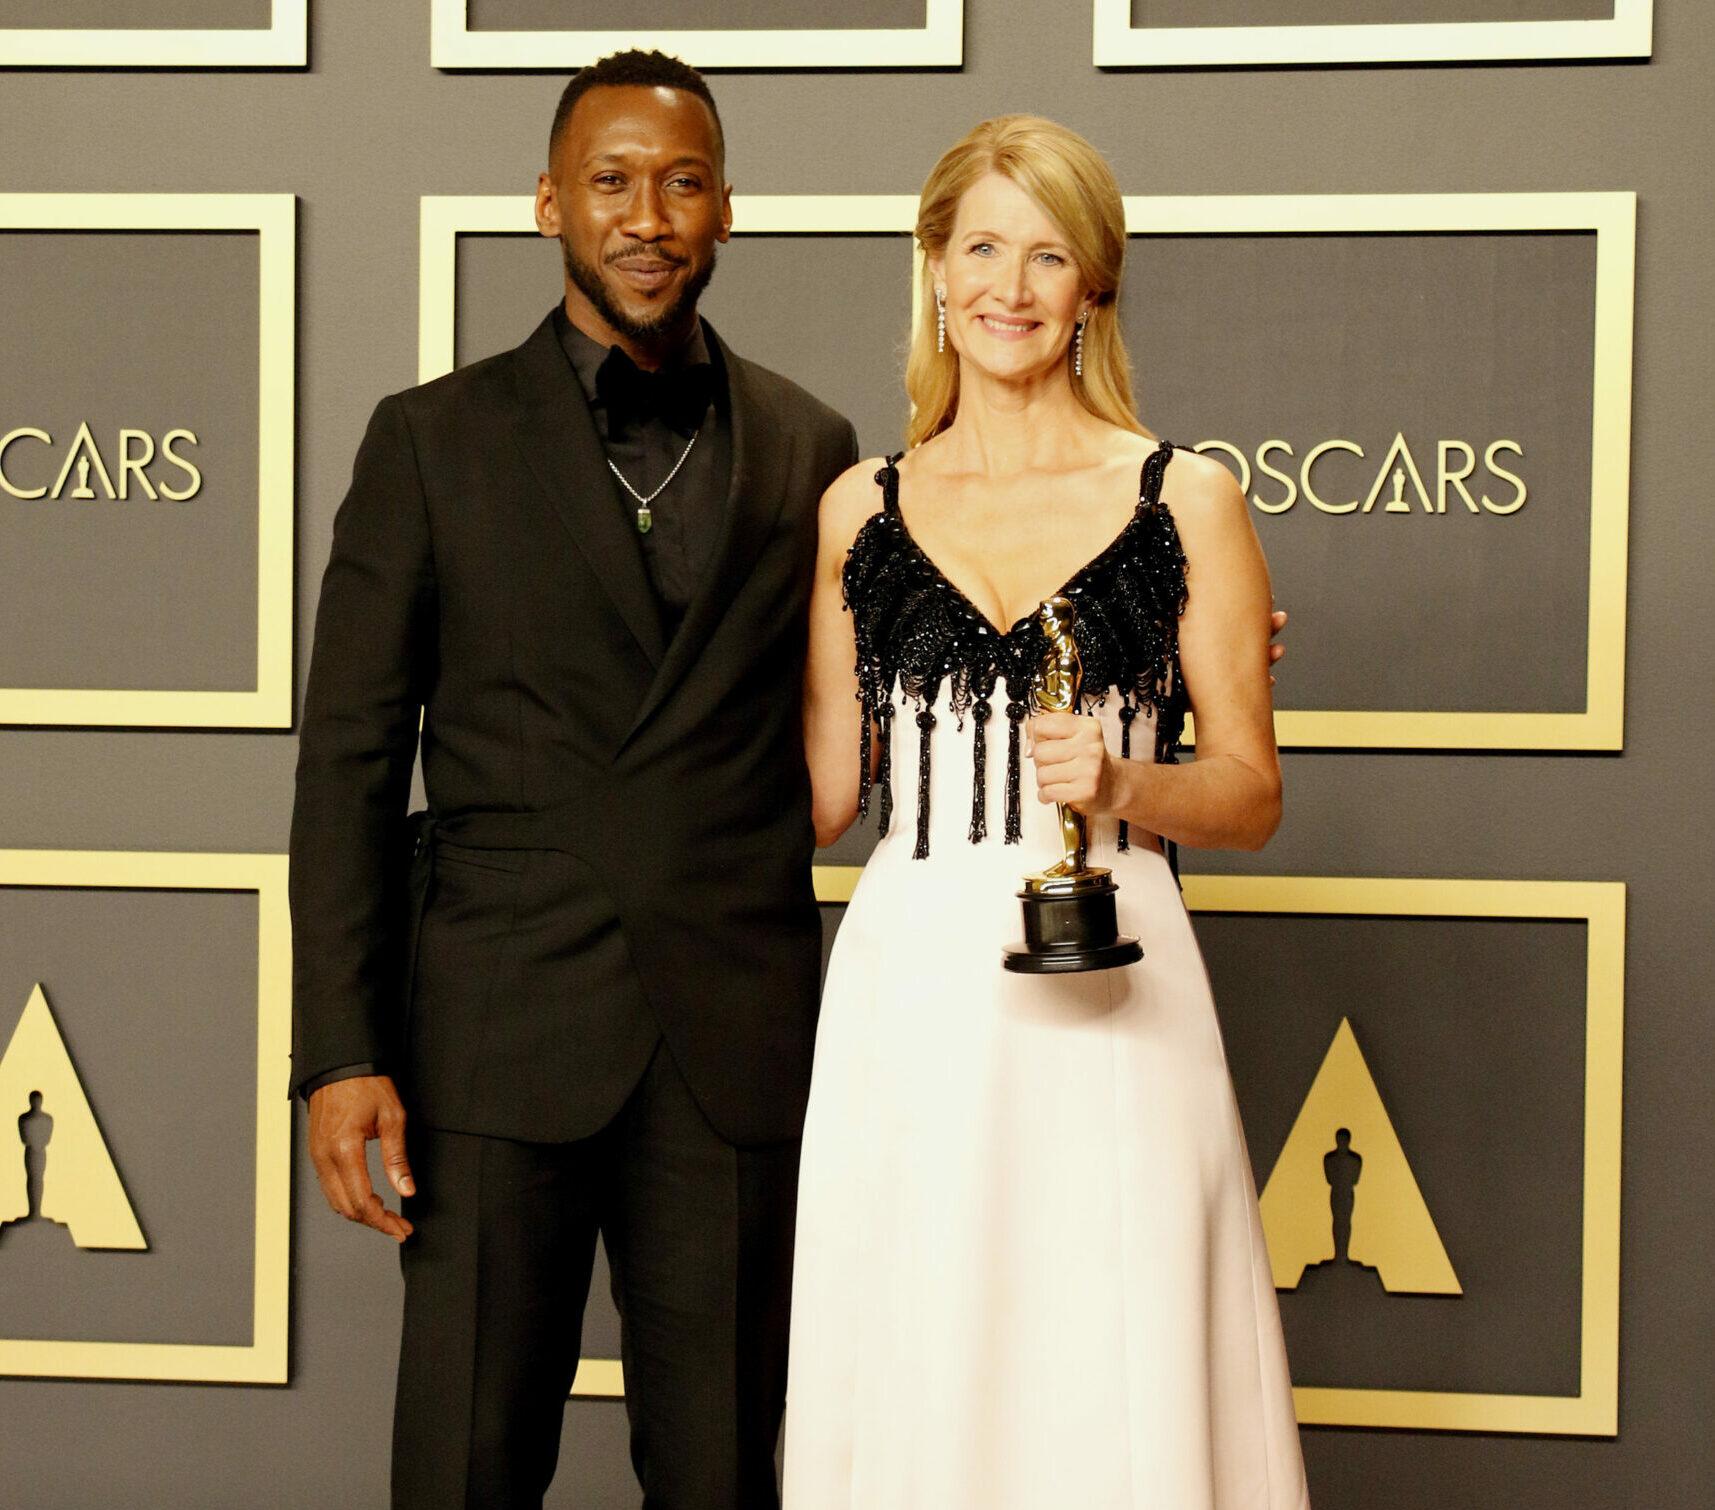 92nd Academy Awards - Press Room held at the Dolby Theatre in Hollywood. 09 Feb 2020 Pictured: Mahershala Ali, Laura Dern